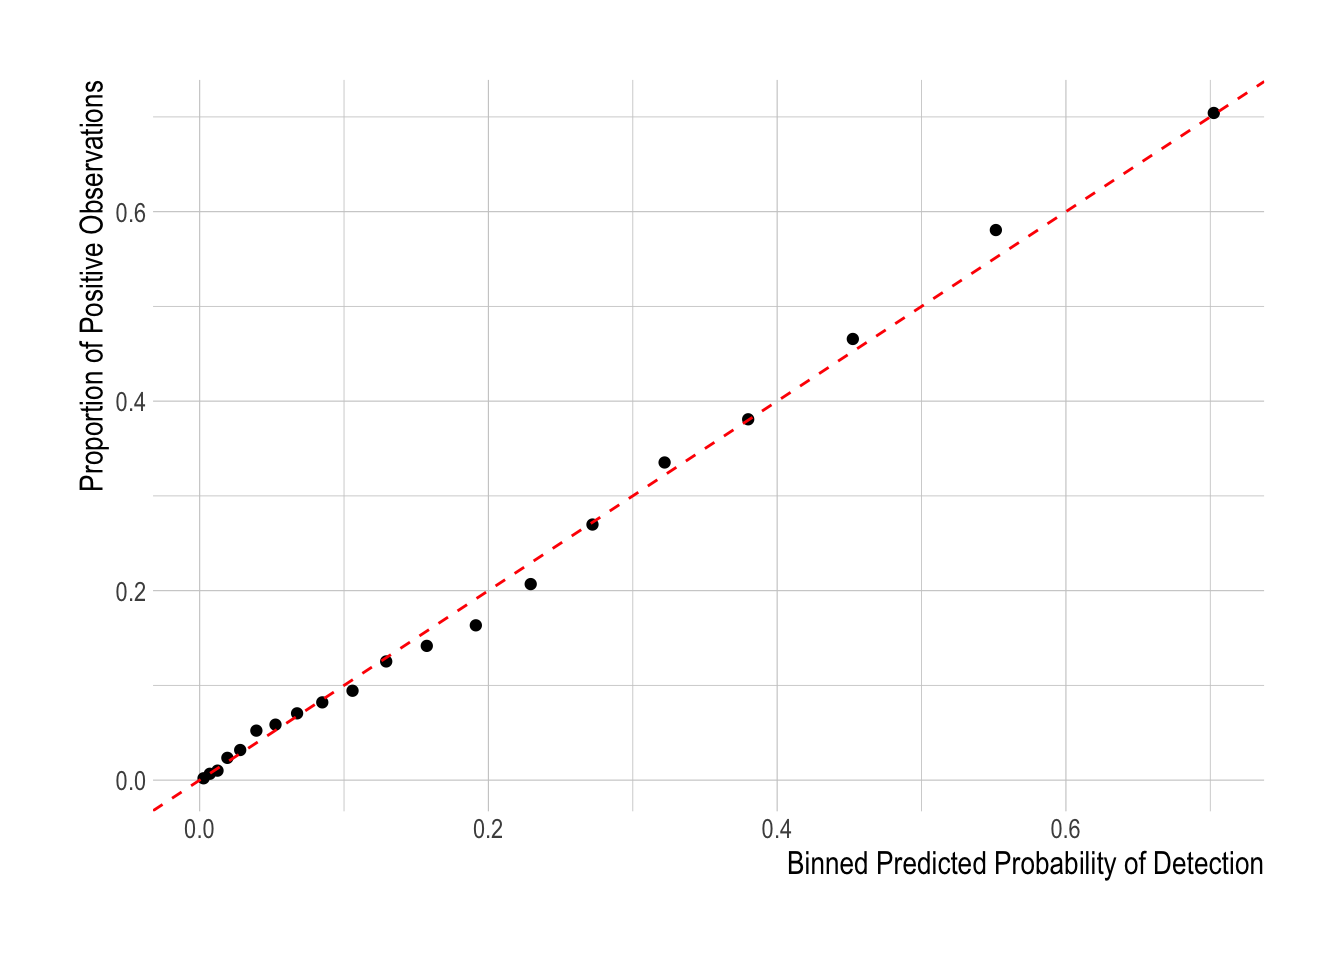 Binned mean predicted probability of detection provided by the first stage of the hurdel model vs observed proportion of positive detections